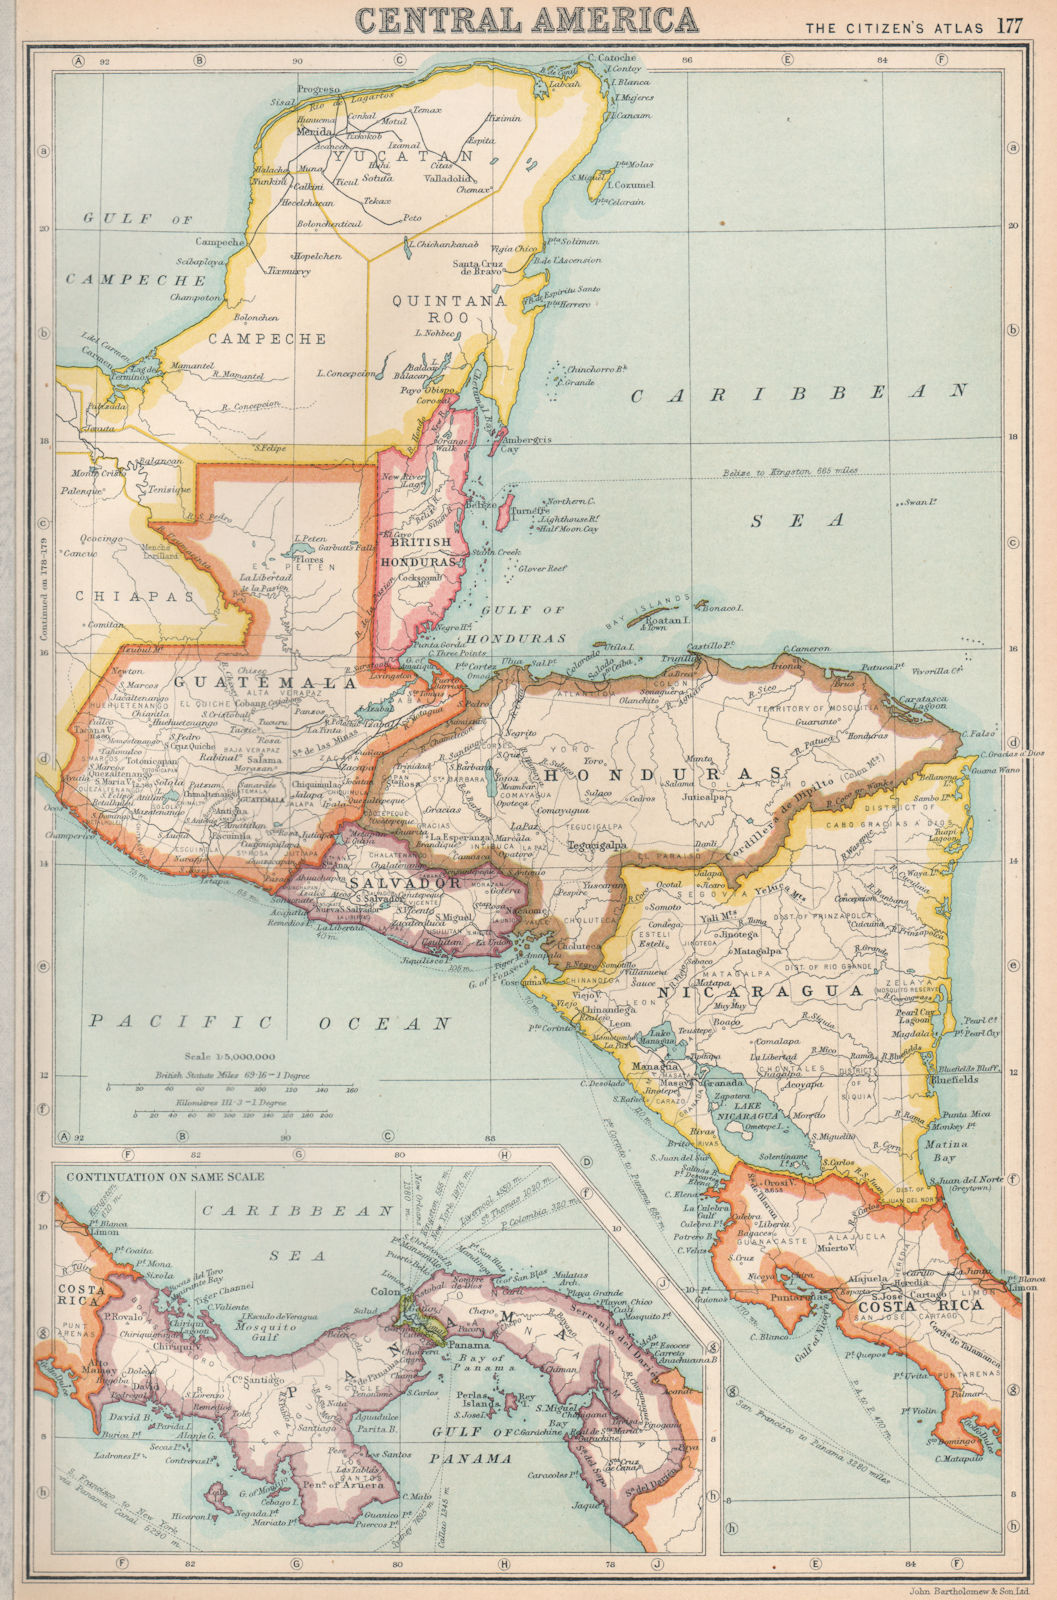 Associate Product CENTRAL AMERICA. US Panama canal zone ownership shown. BARTHOLOMEW 1924 map